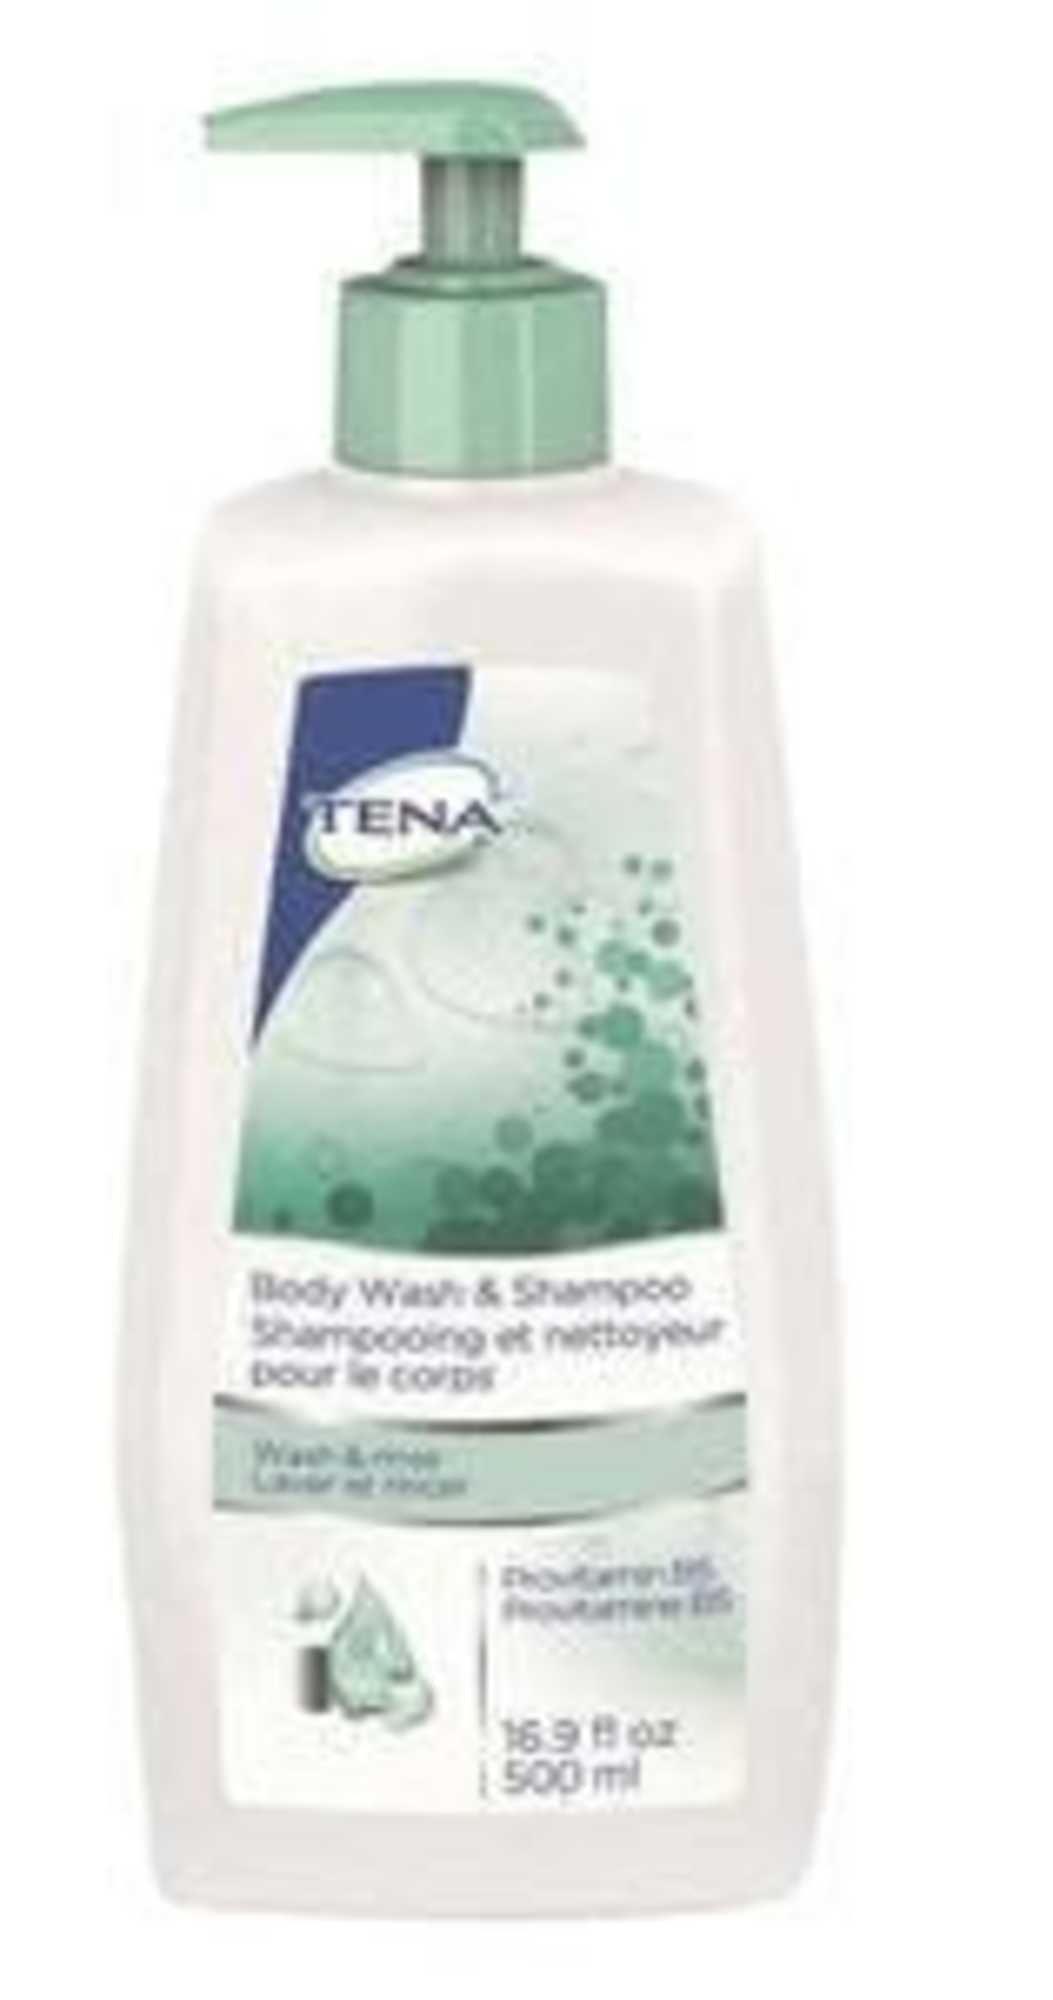 TENA Shampoo and Body Wash 16.9 oz. Pump Bottle Scented One count - KatyMedSolutions